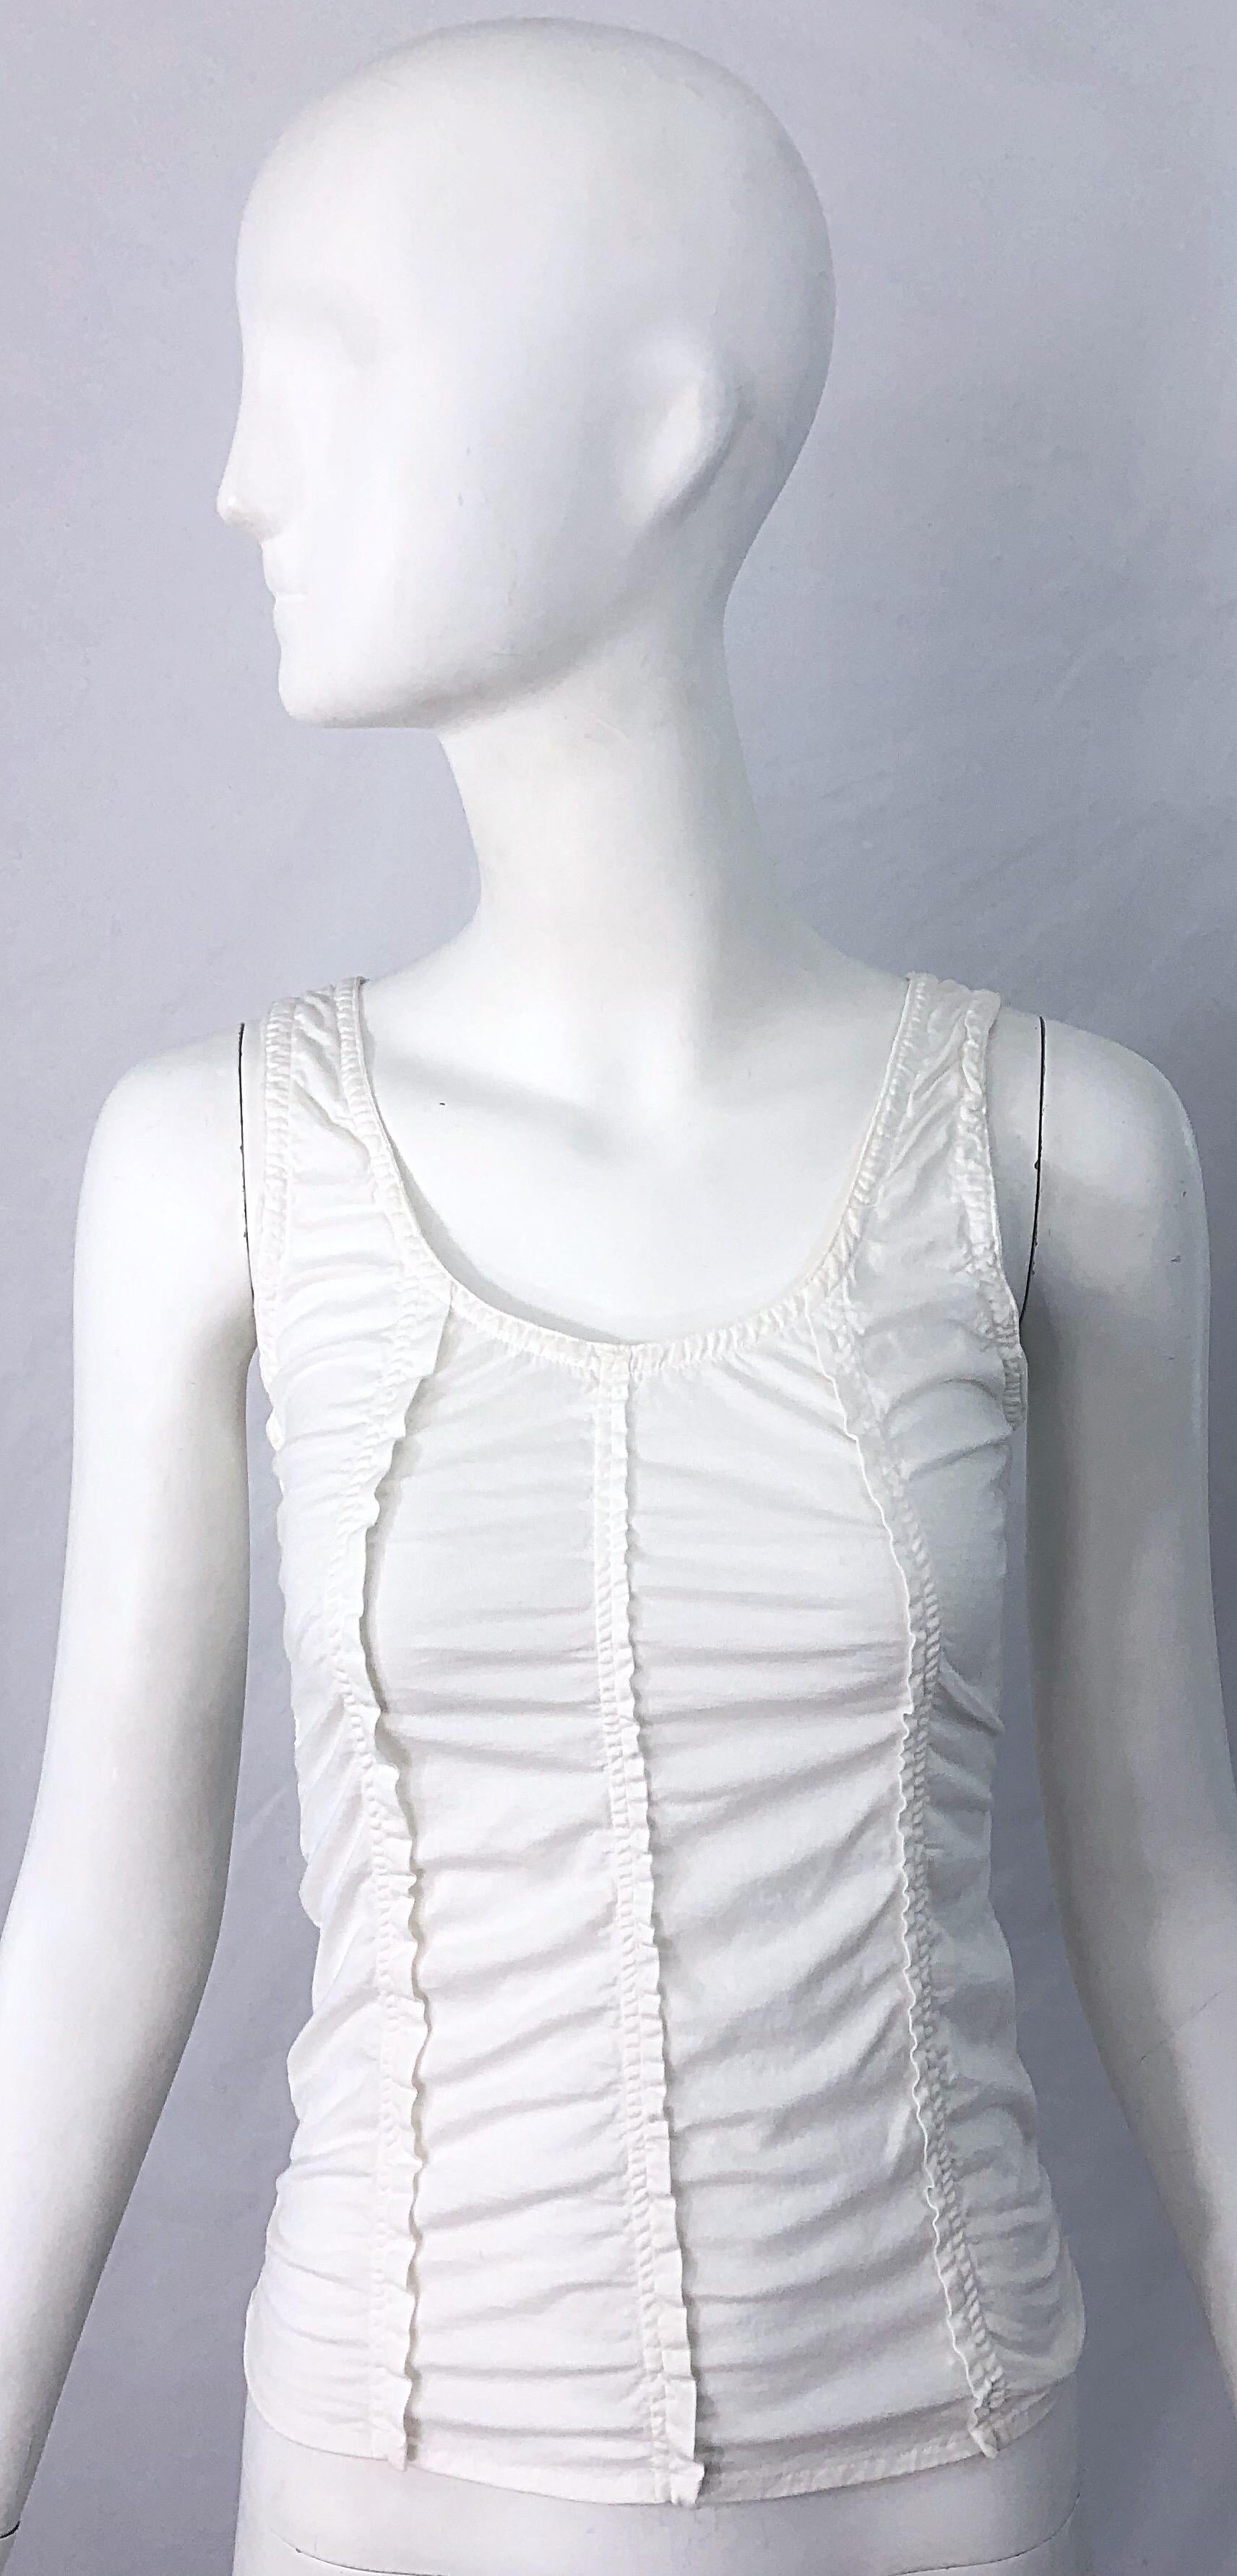 The perfect white tank! TOM FORD for YVES SAINT LAURENT white cotton sleeveless tank top shirt ! Features flattering vertical rows of ruffles down the front and back. Simply slips over the head, and stretches to fit. Can easily be dressed up or